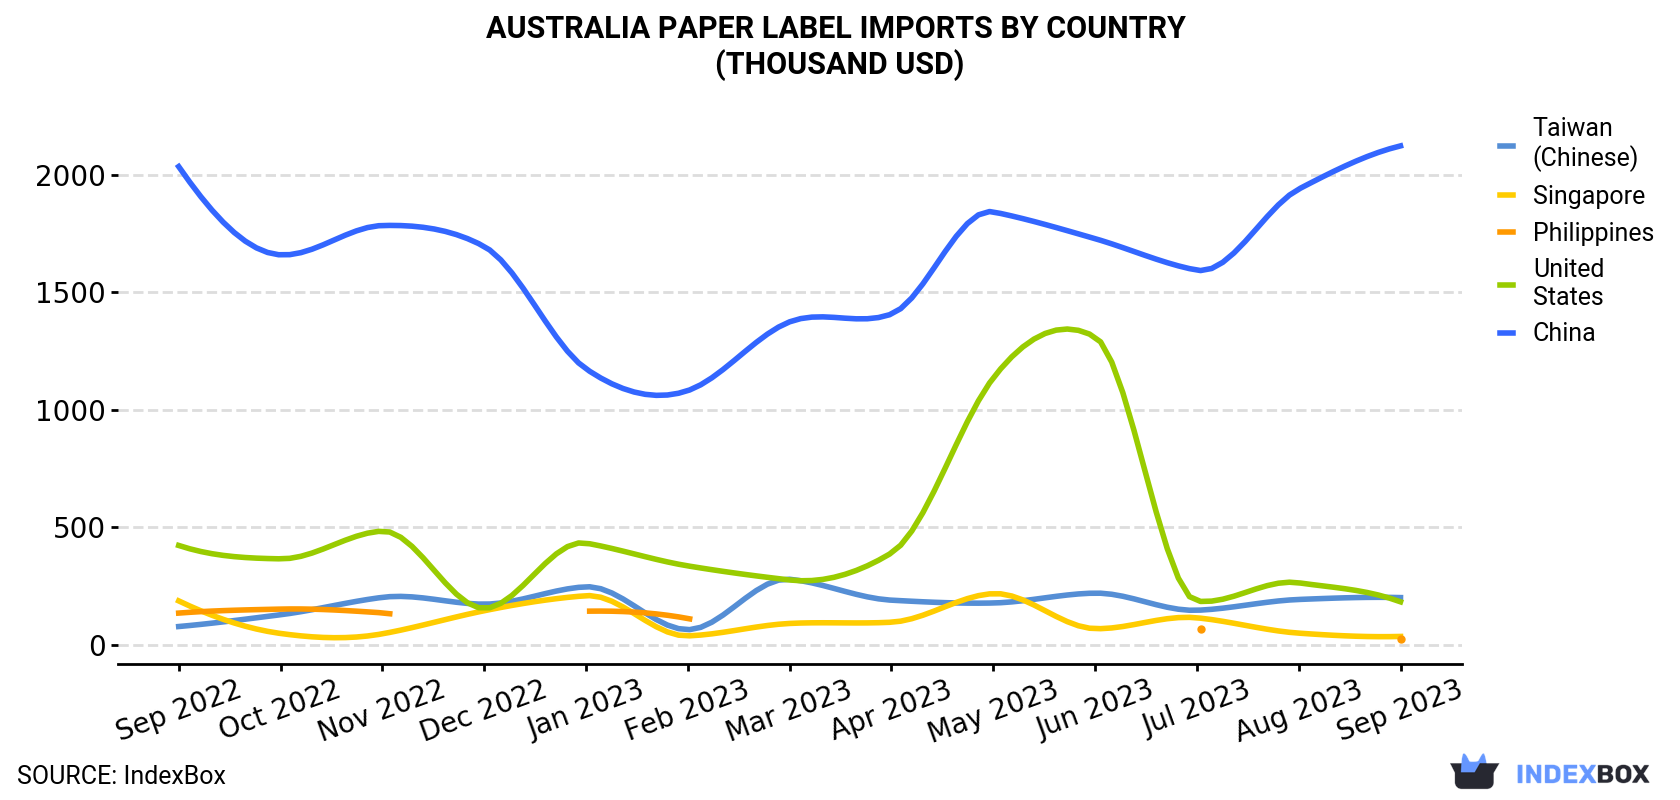 Australia Paper Label Imports By Country (Thousand USD)